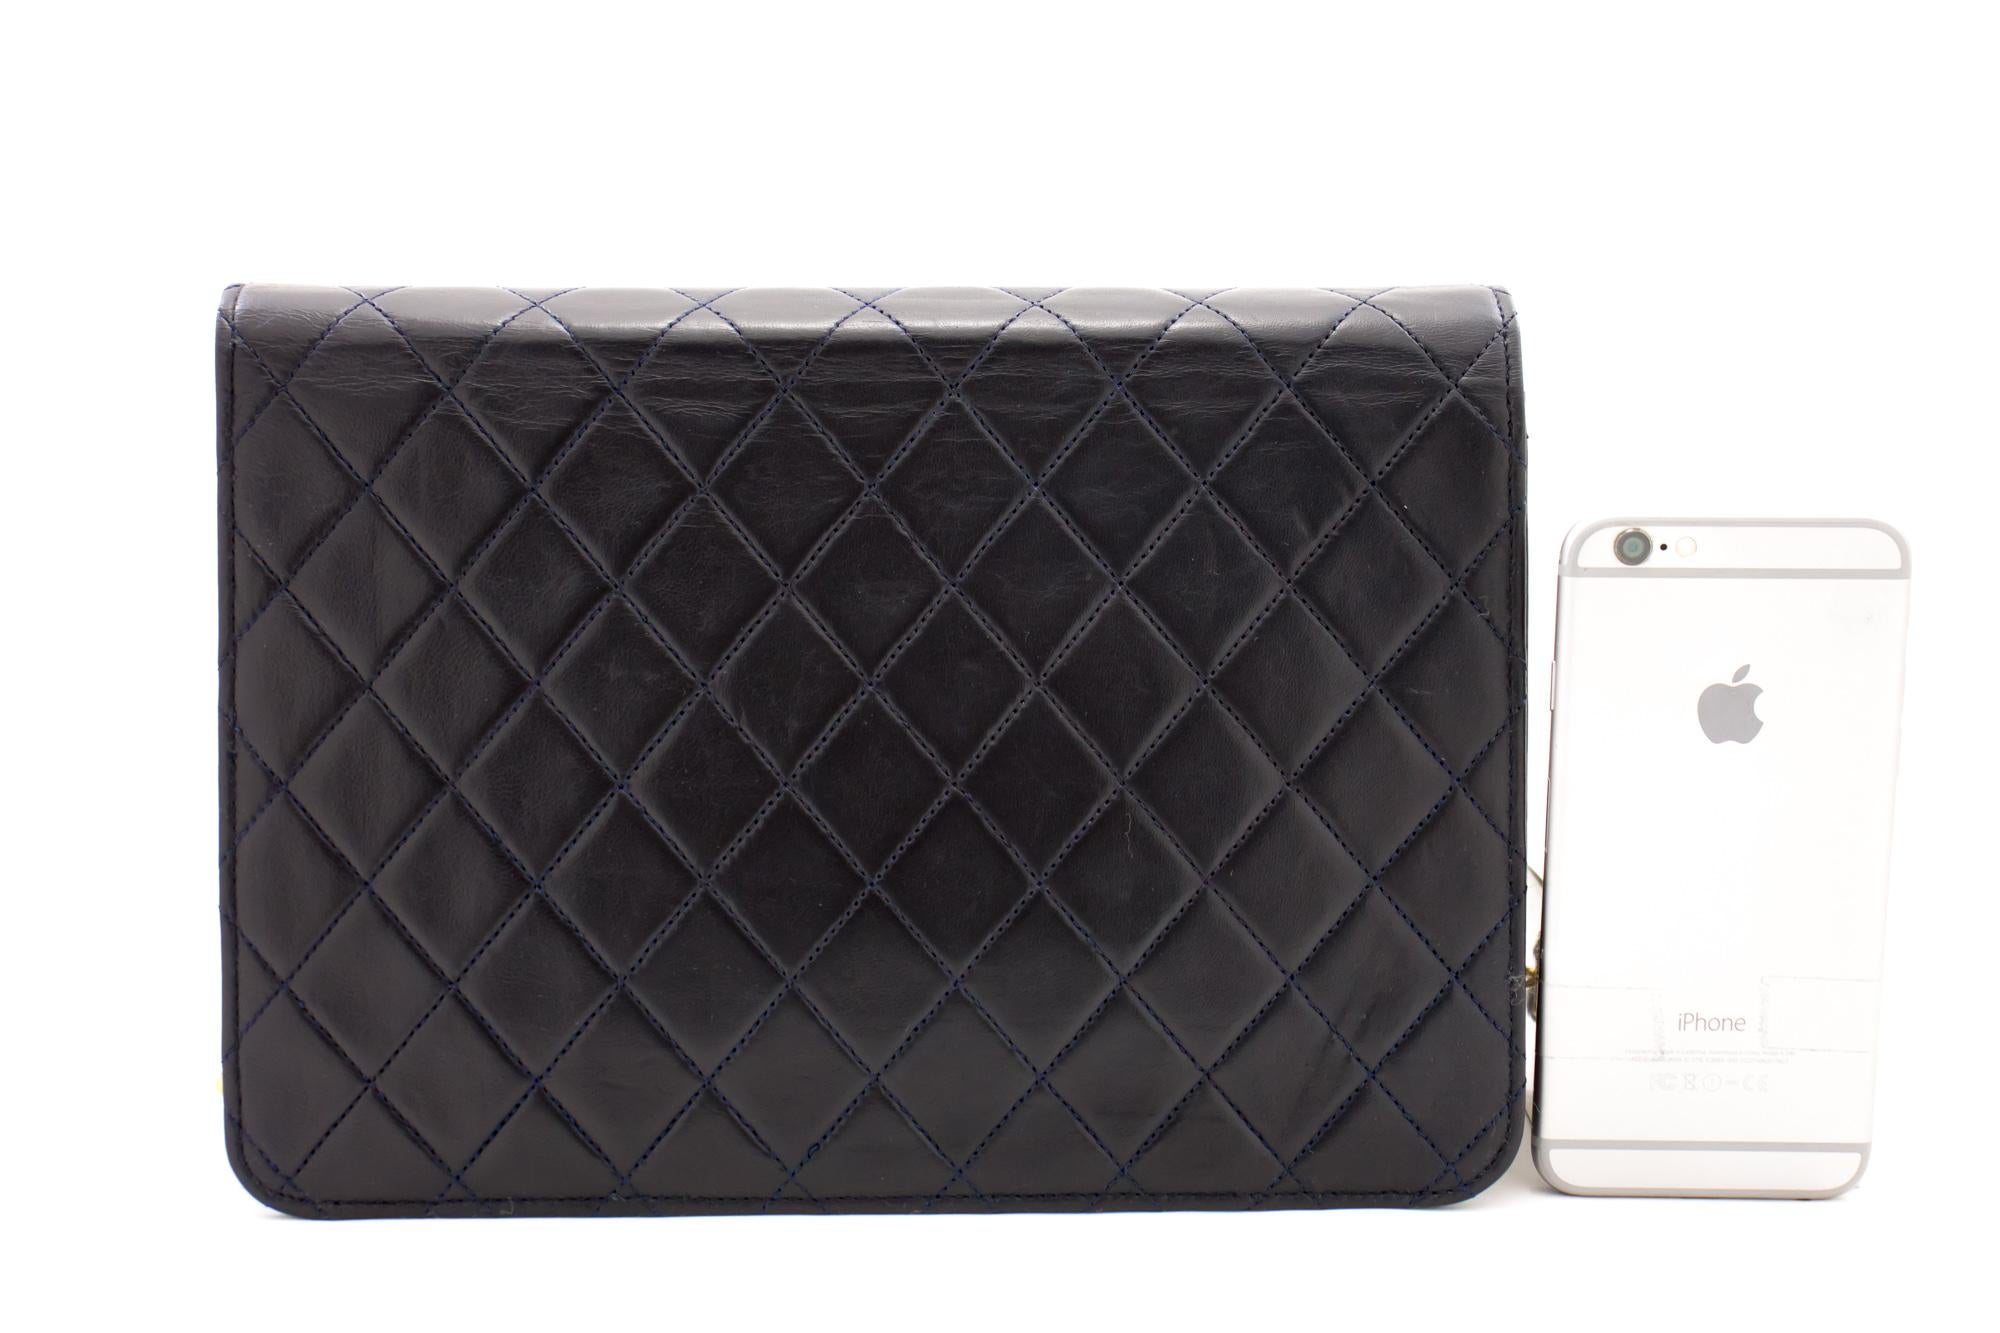 Black CHANEL Chain Shoulder Bag Clutch Navy Flap Quilted Purse Lambskin